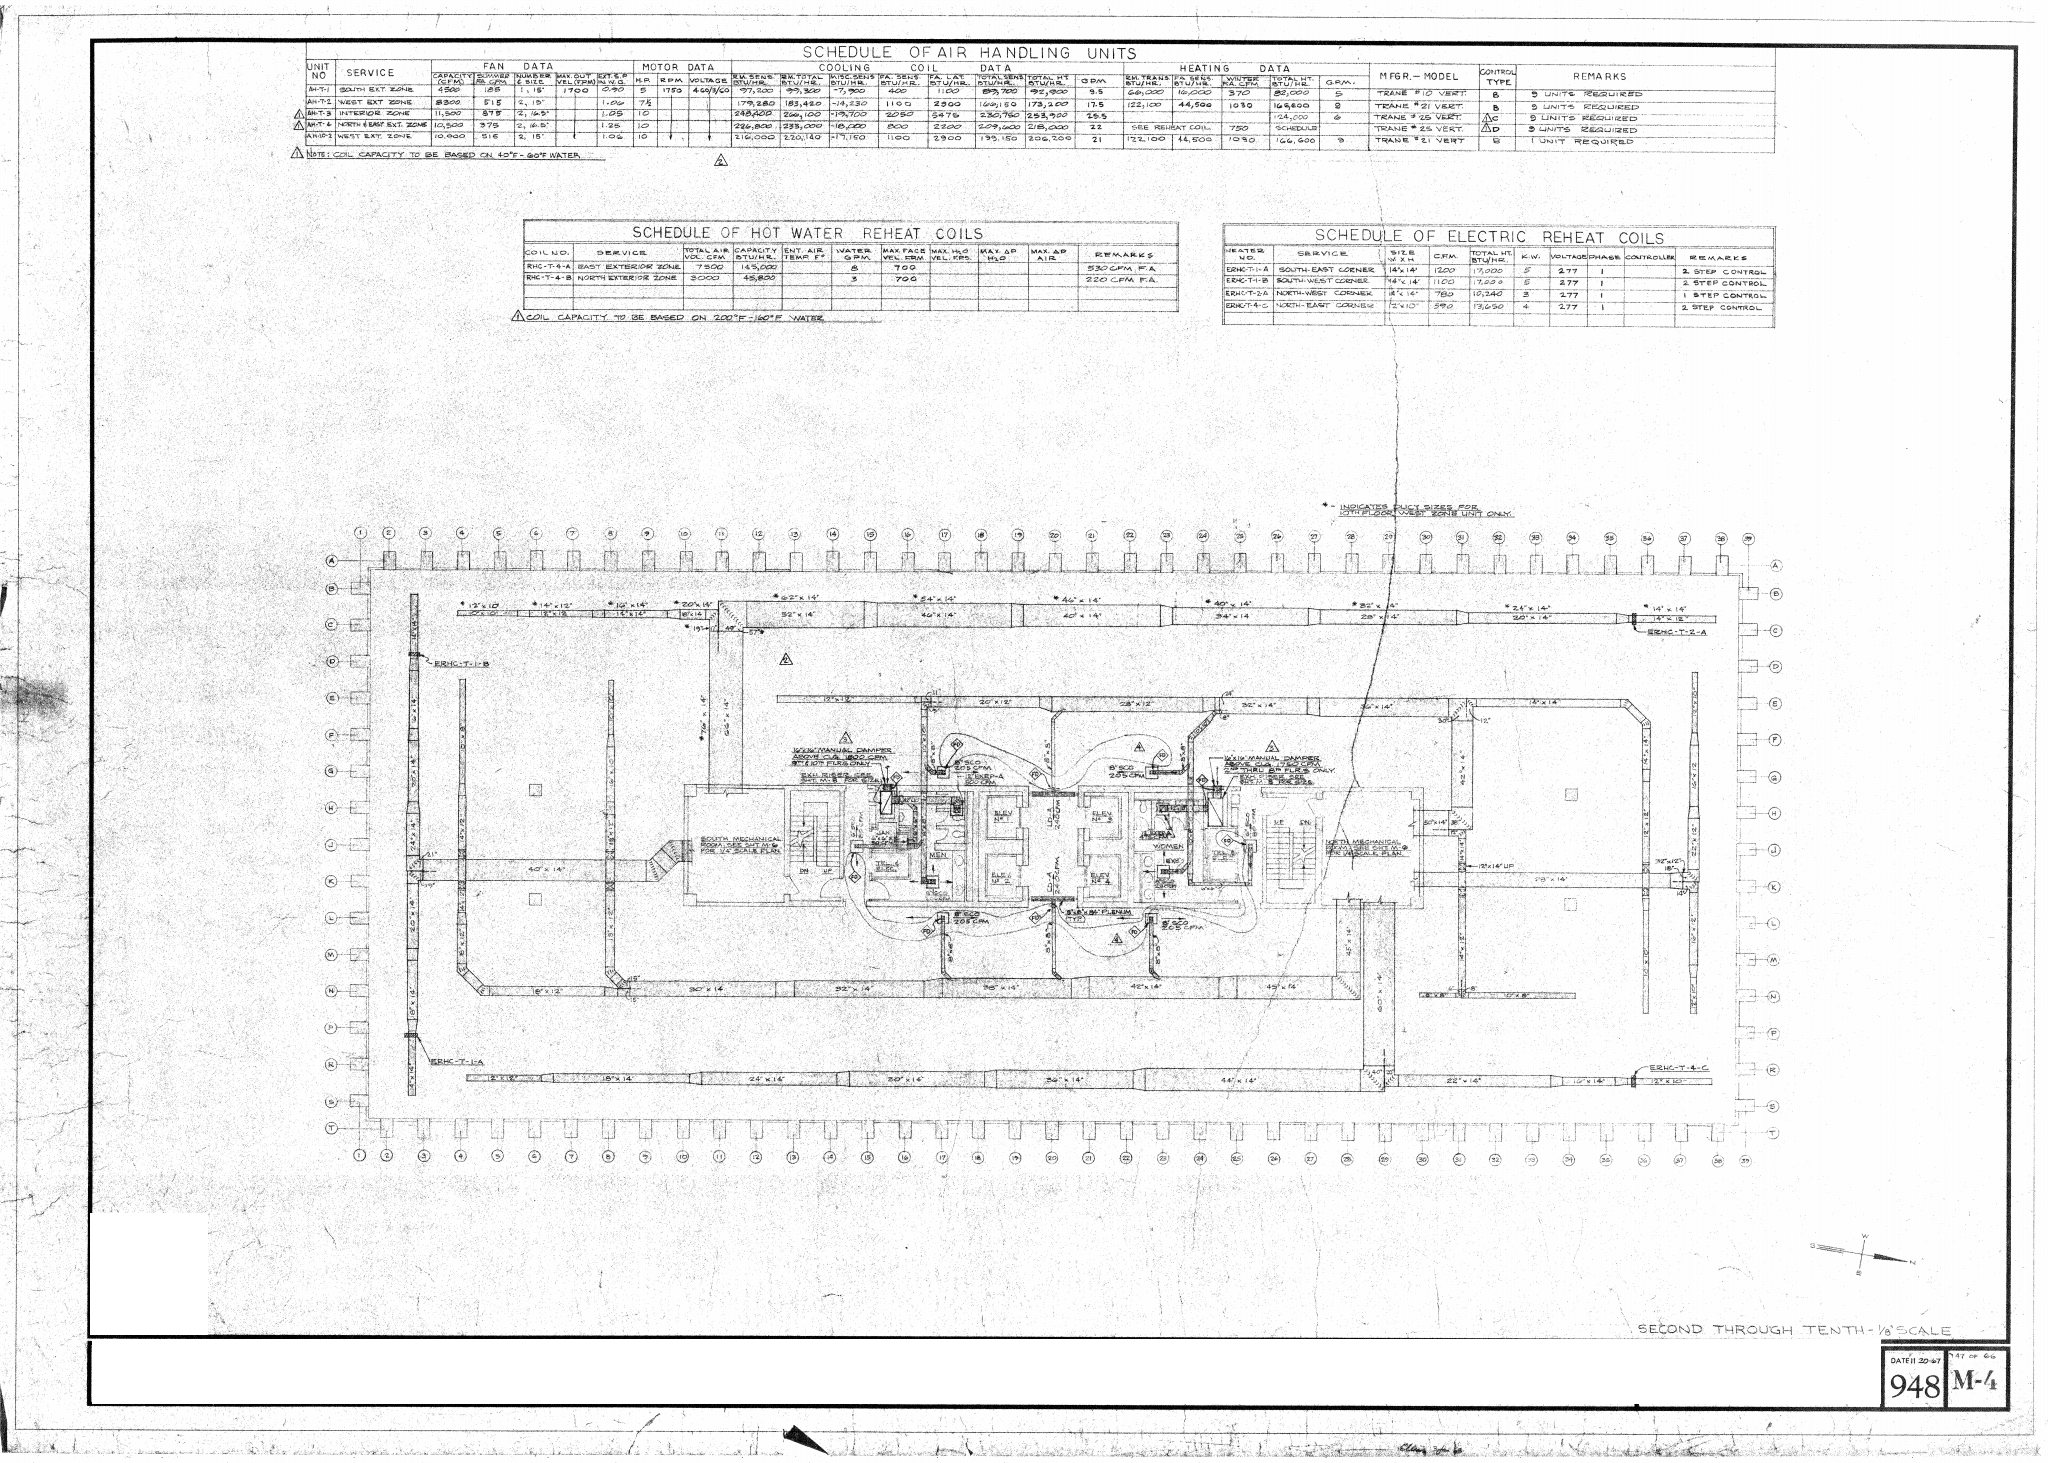 Example - Mechanical Schedule and Typical Mechanical Floorplan